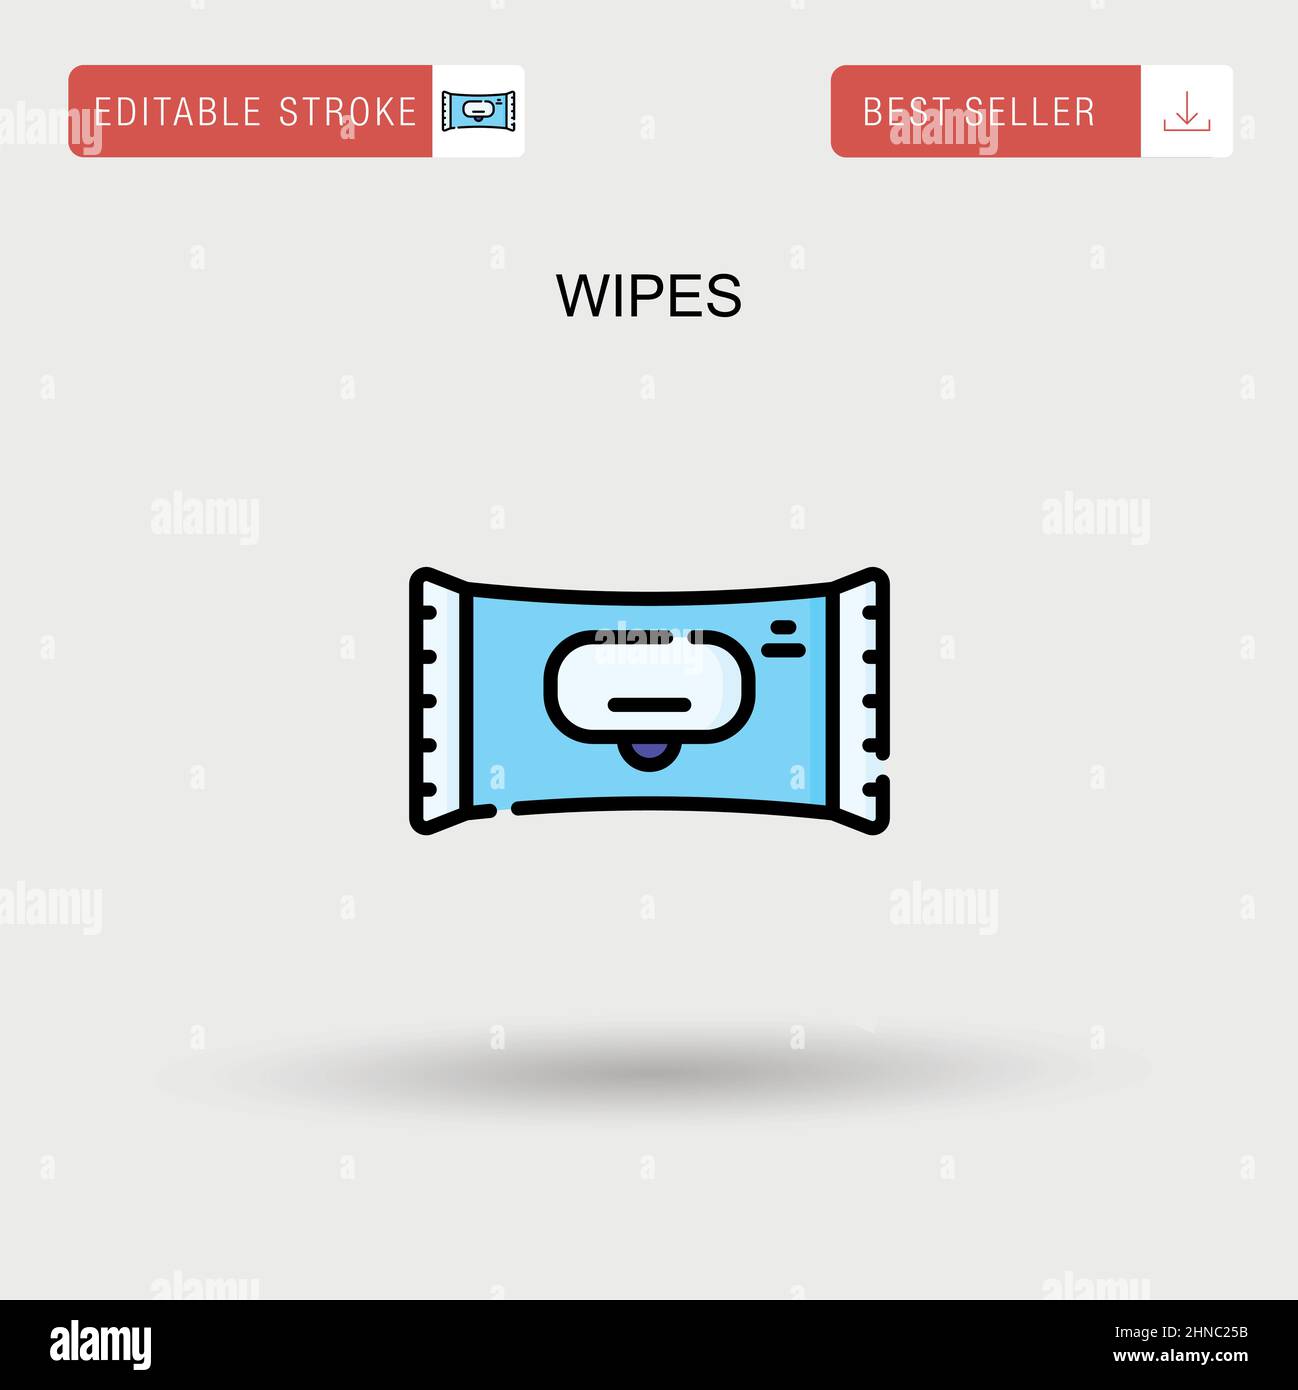 71,238 Wipes Design Images, Stock Photos, 3D objects, & Vectors